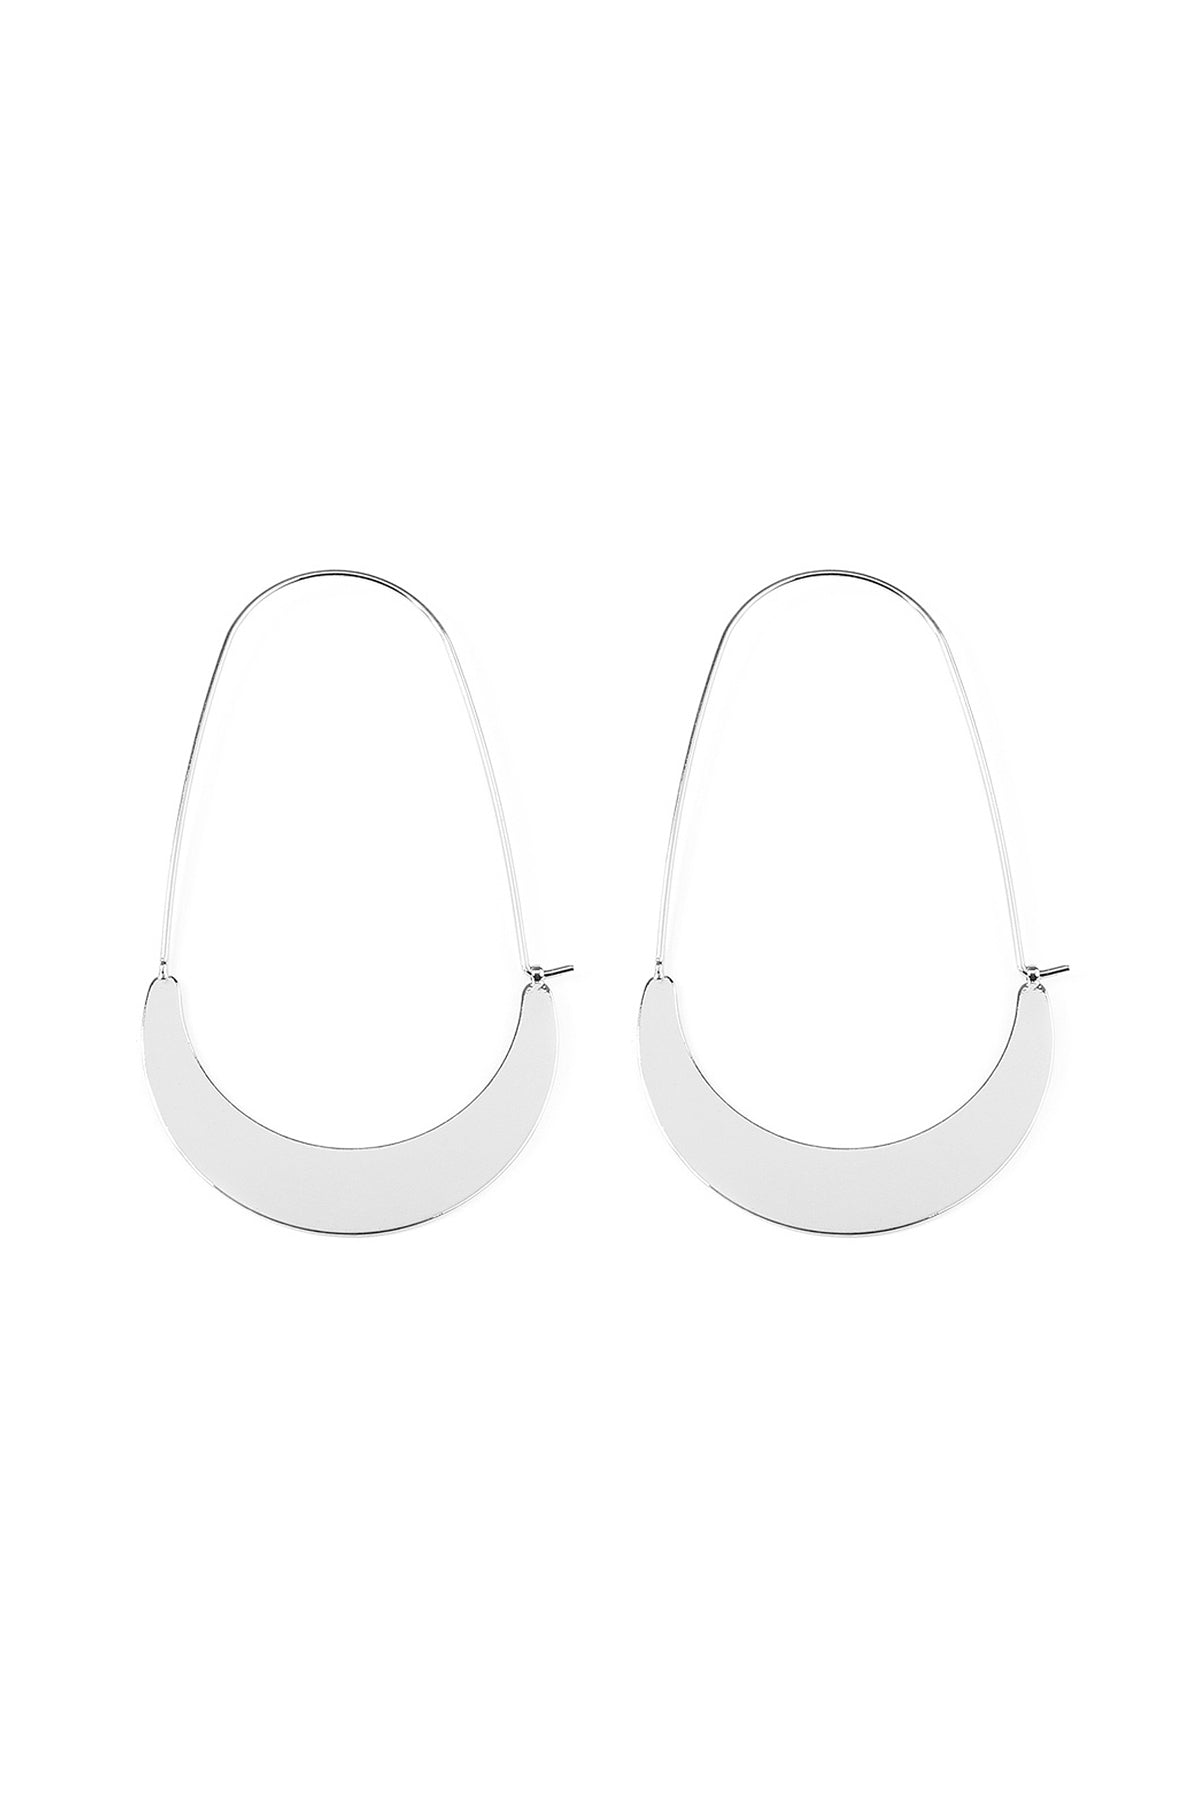 BOX-QUARTER MOON HOOP EARRING/6PAIRS (NOW $1.50 ONLY!)